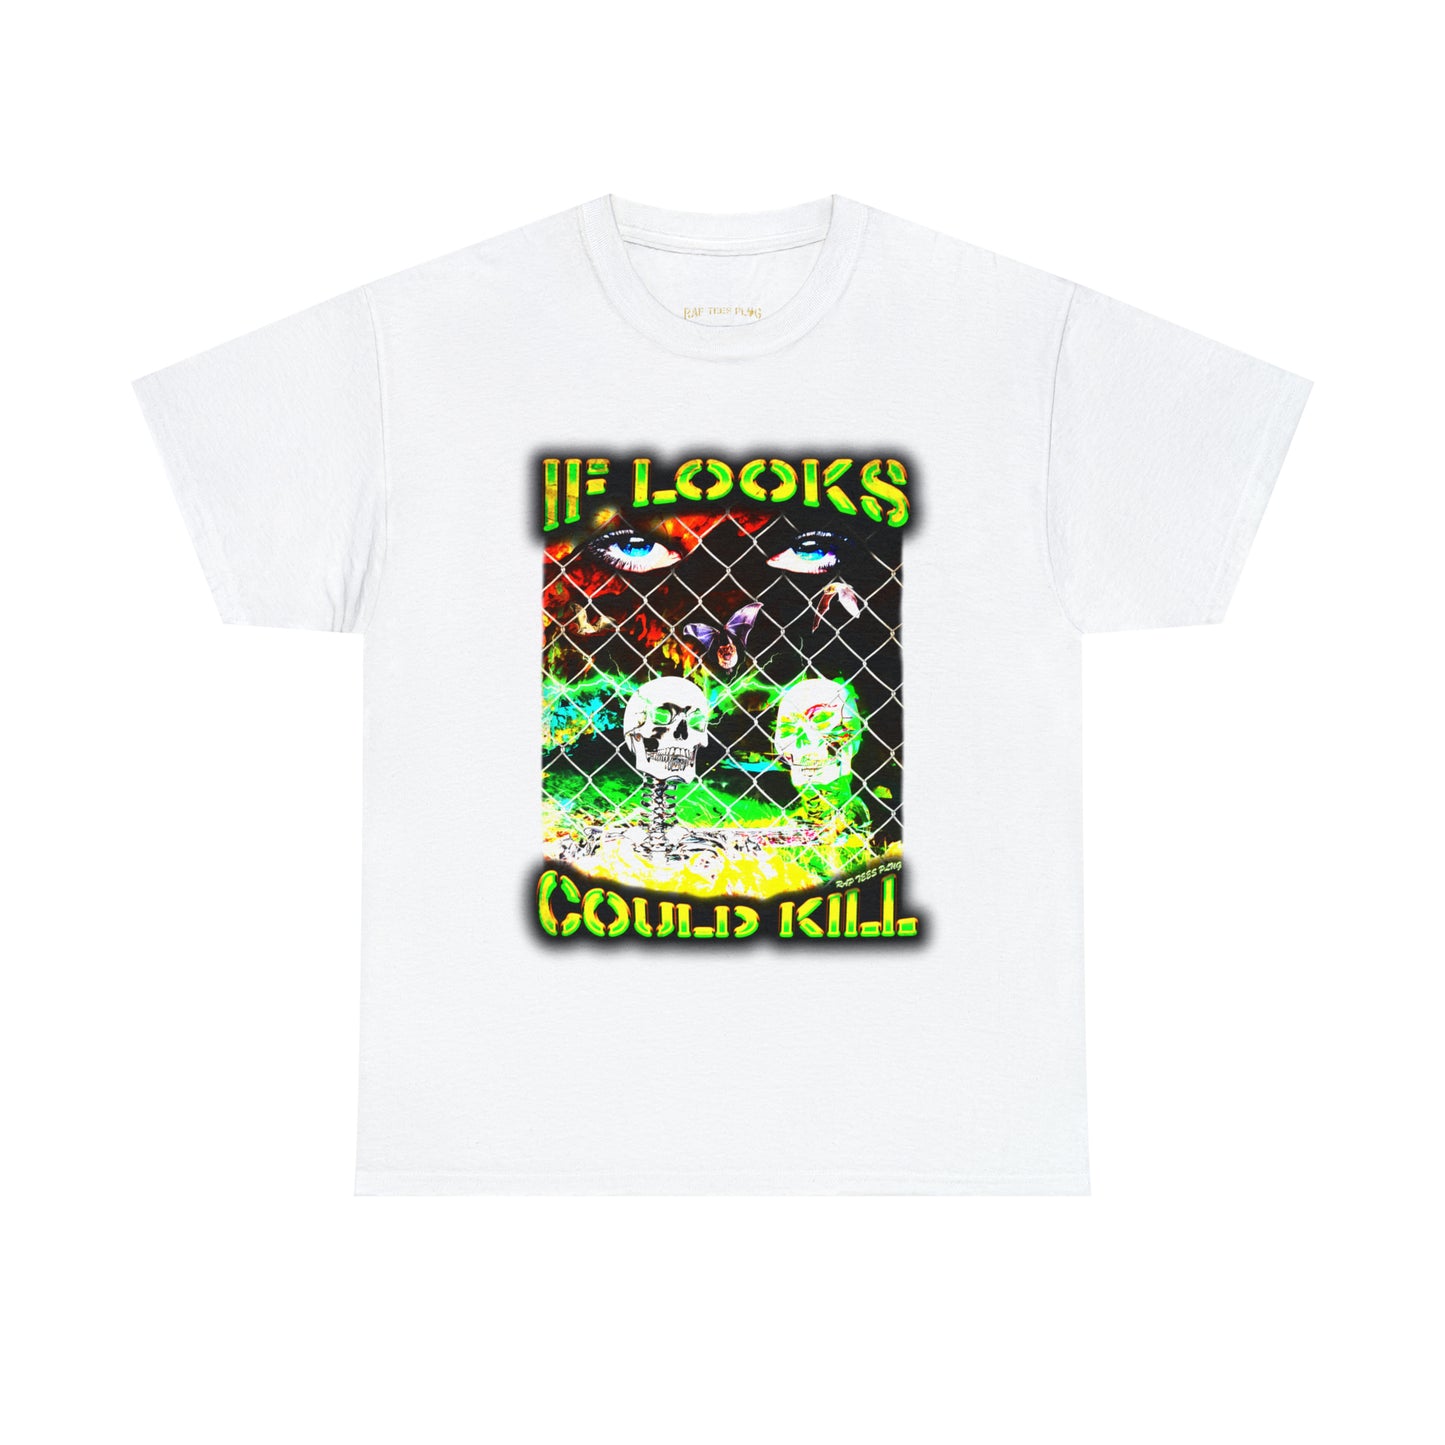 If Looks Could Kill Rap Tee